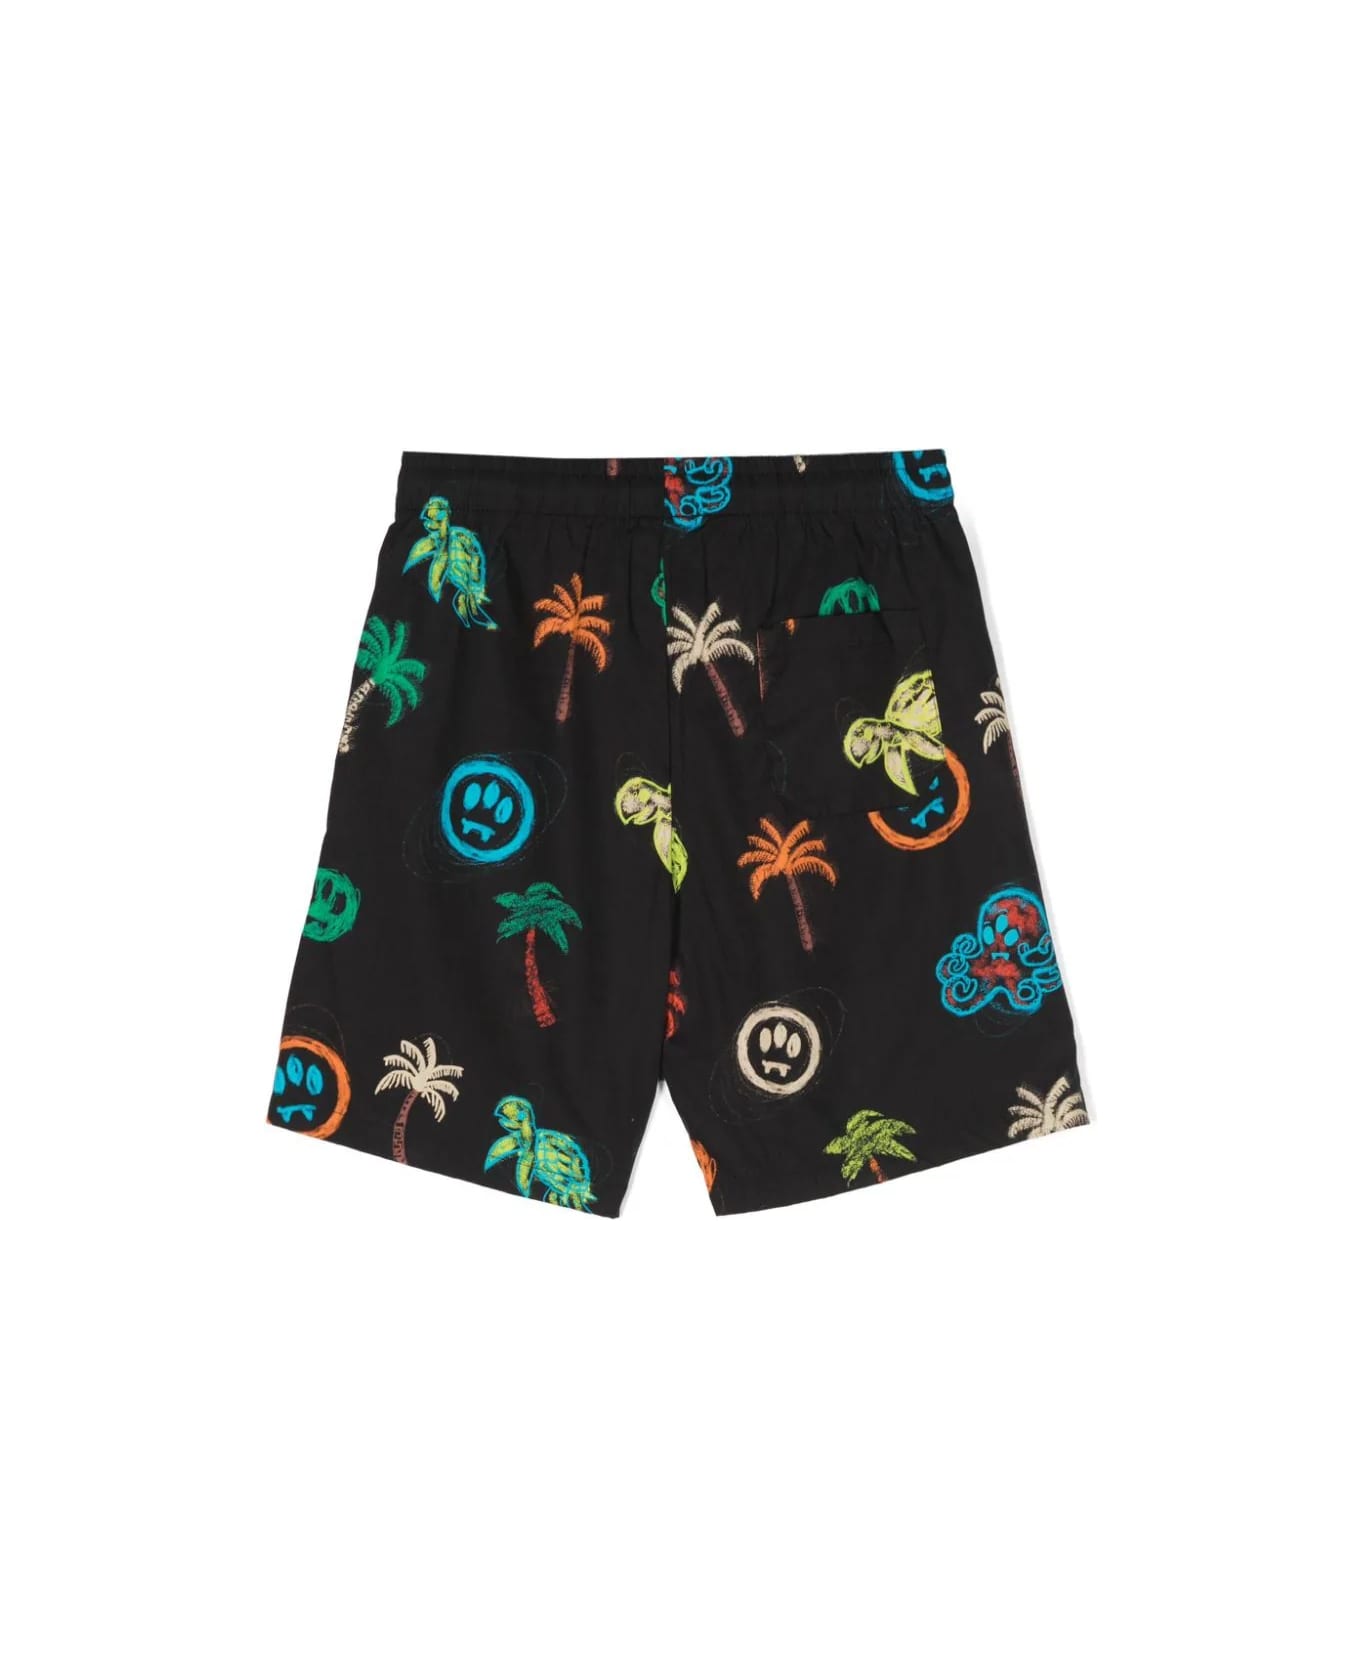 Barrow Black Shorts With All-over Print - Black